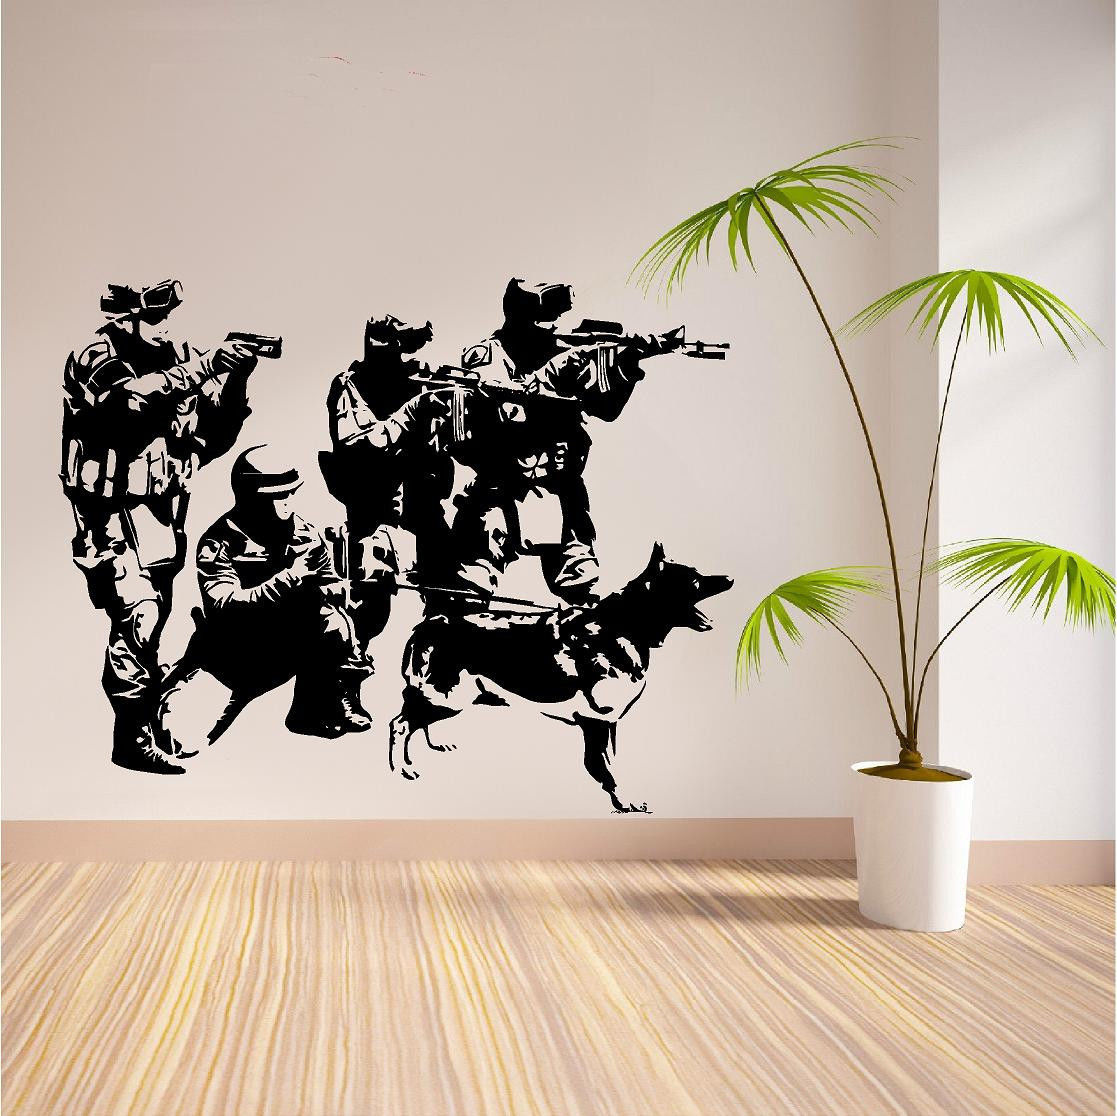 C099 Swat Team Military Army Soldiers Dogs Removeable Vinyl Wall Sticker For Boys Rooms Decoration Decal Livingroom Home Decor Vinyl Wall Stickers Wall Stickerstickers For Aliexpress